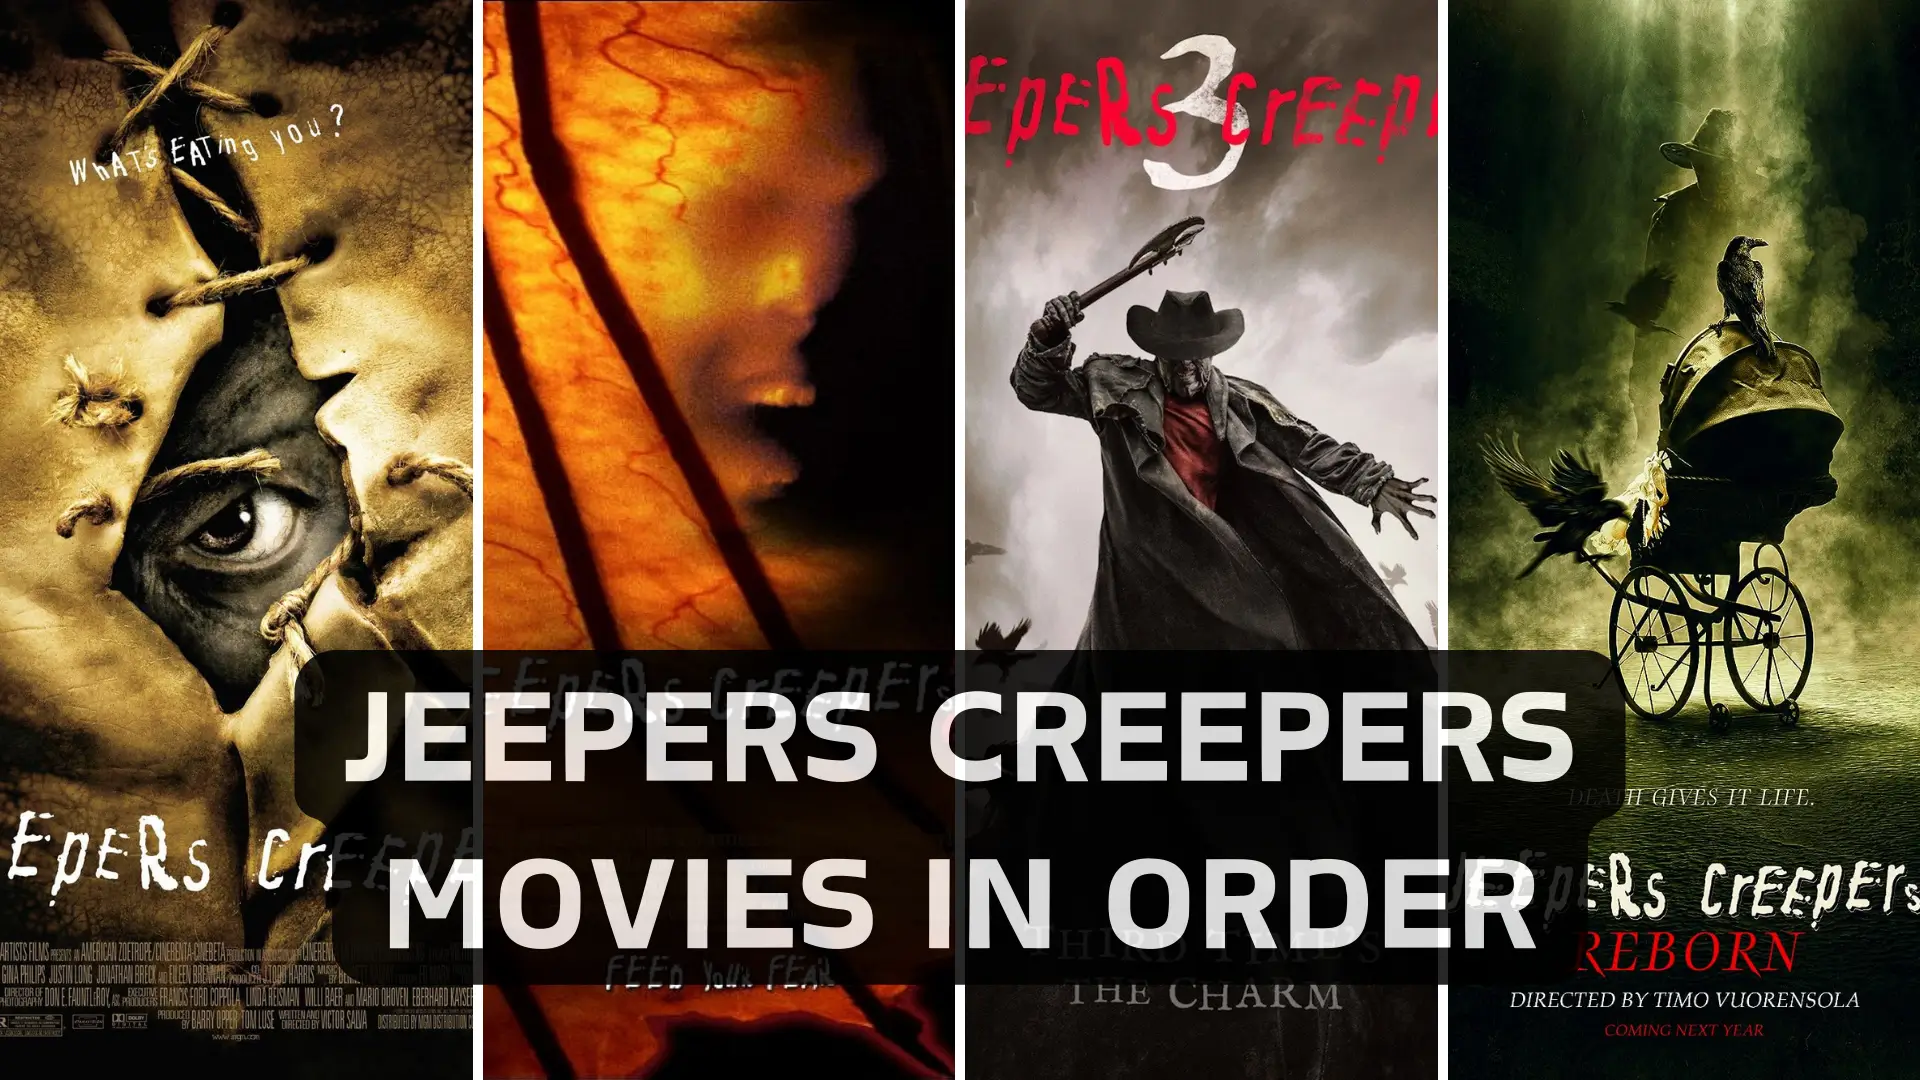 Jeepers Creepers Movies in Order